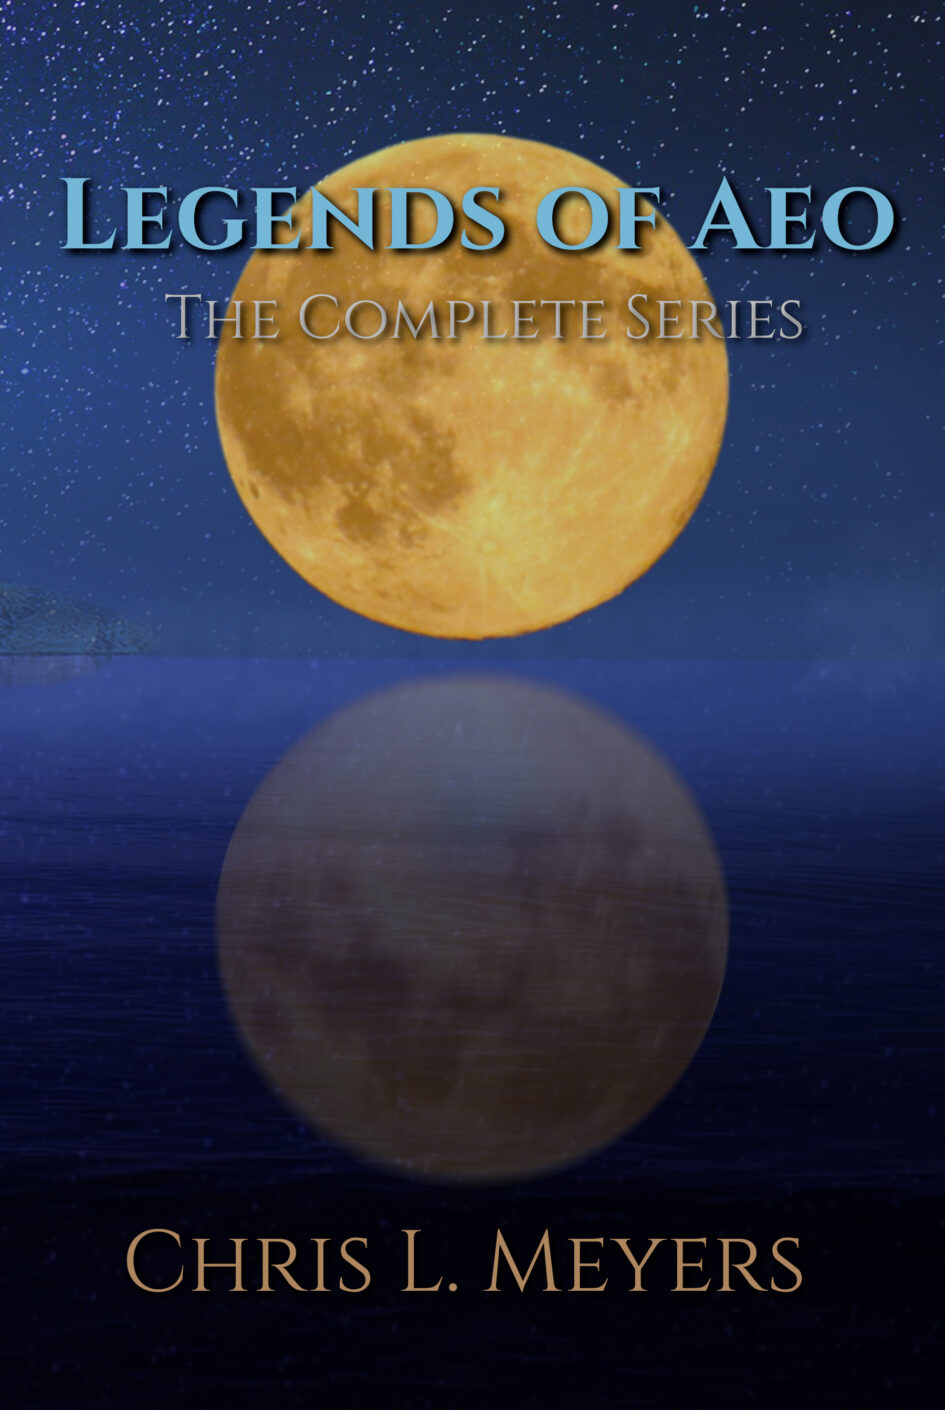 book cover orange moon with text